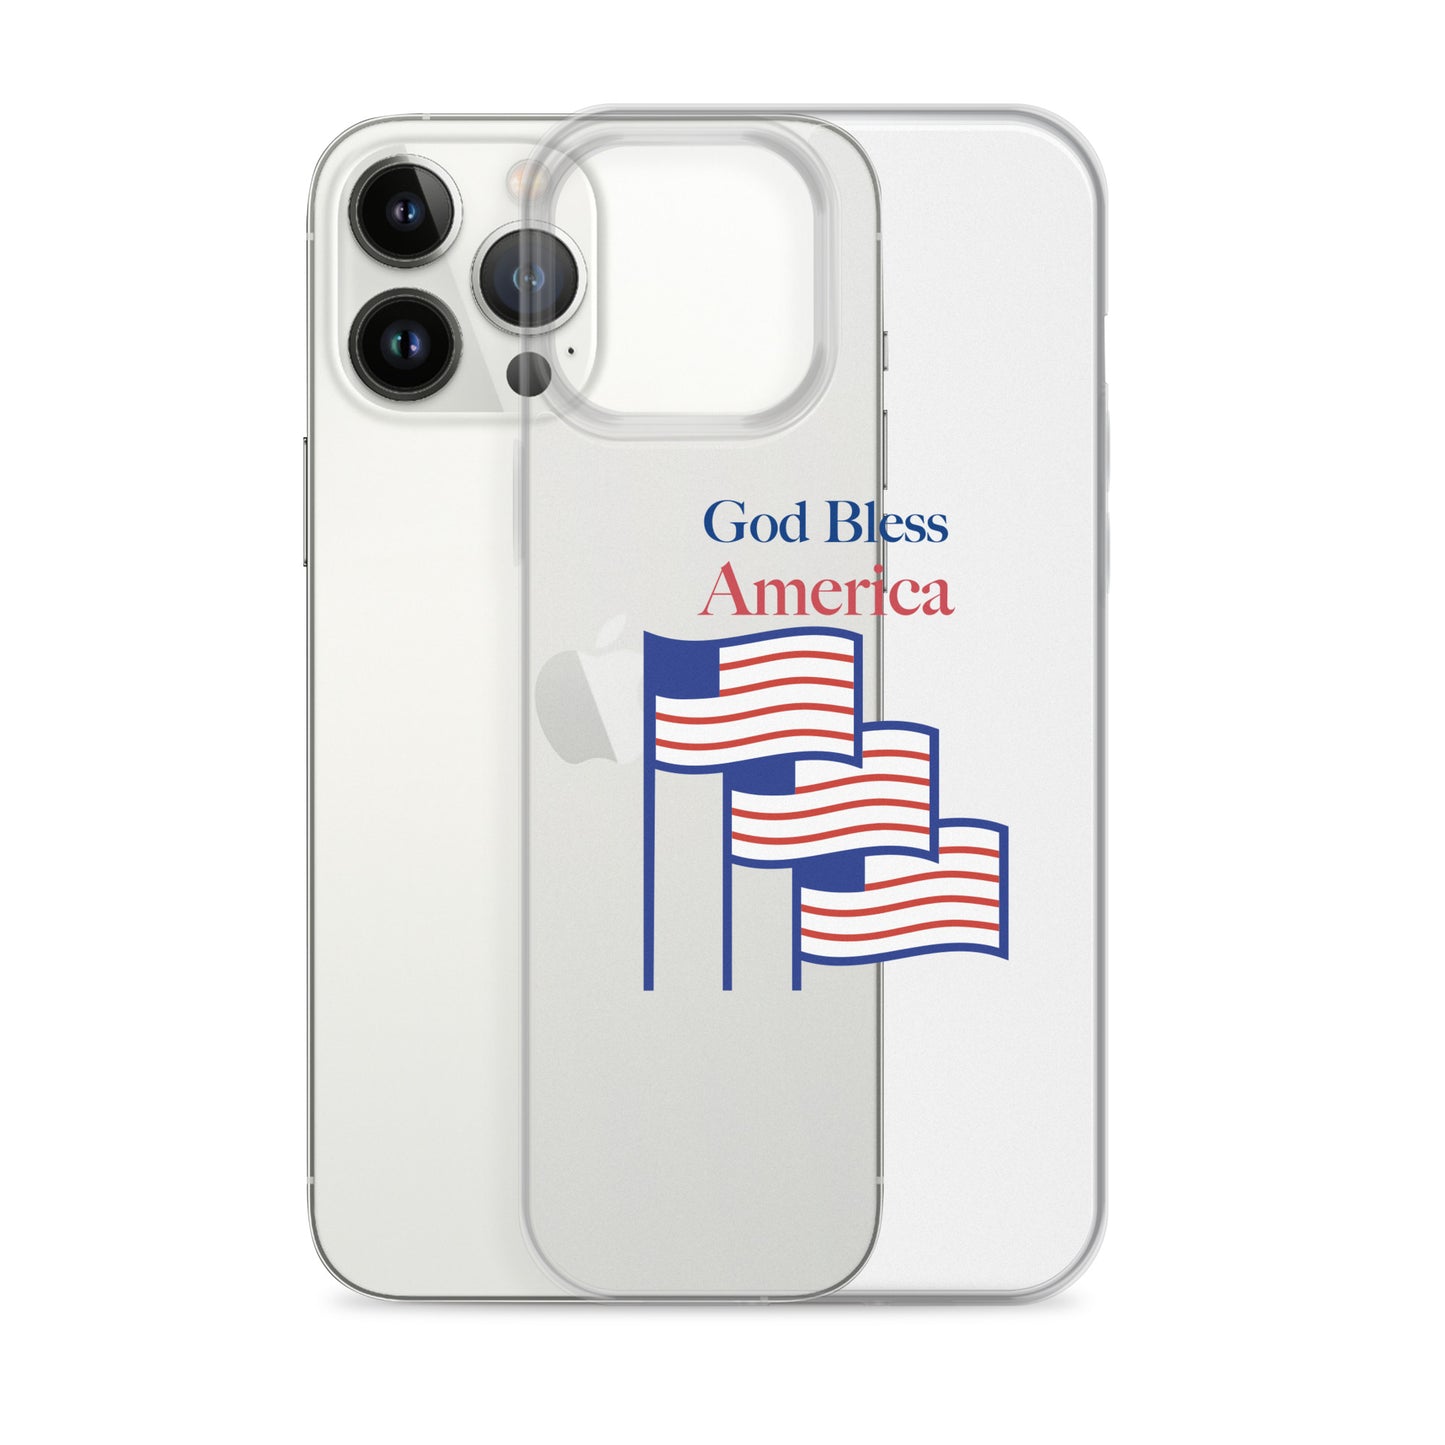 iPhone Case - God Bless America